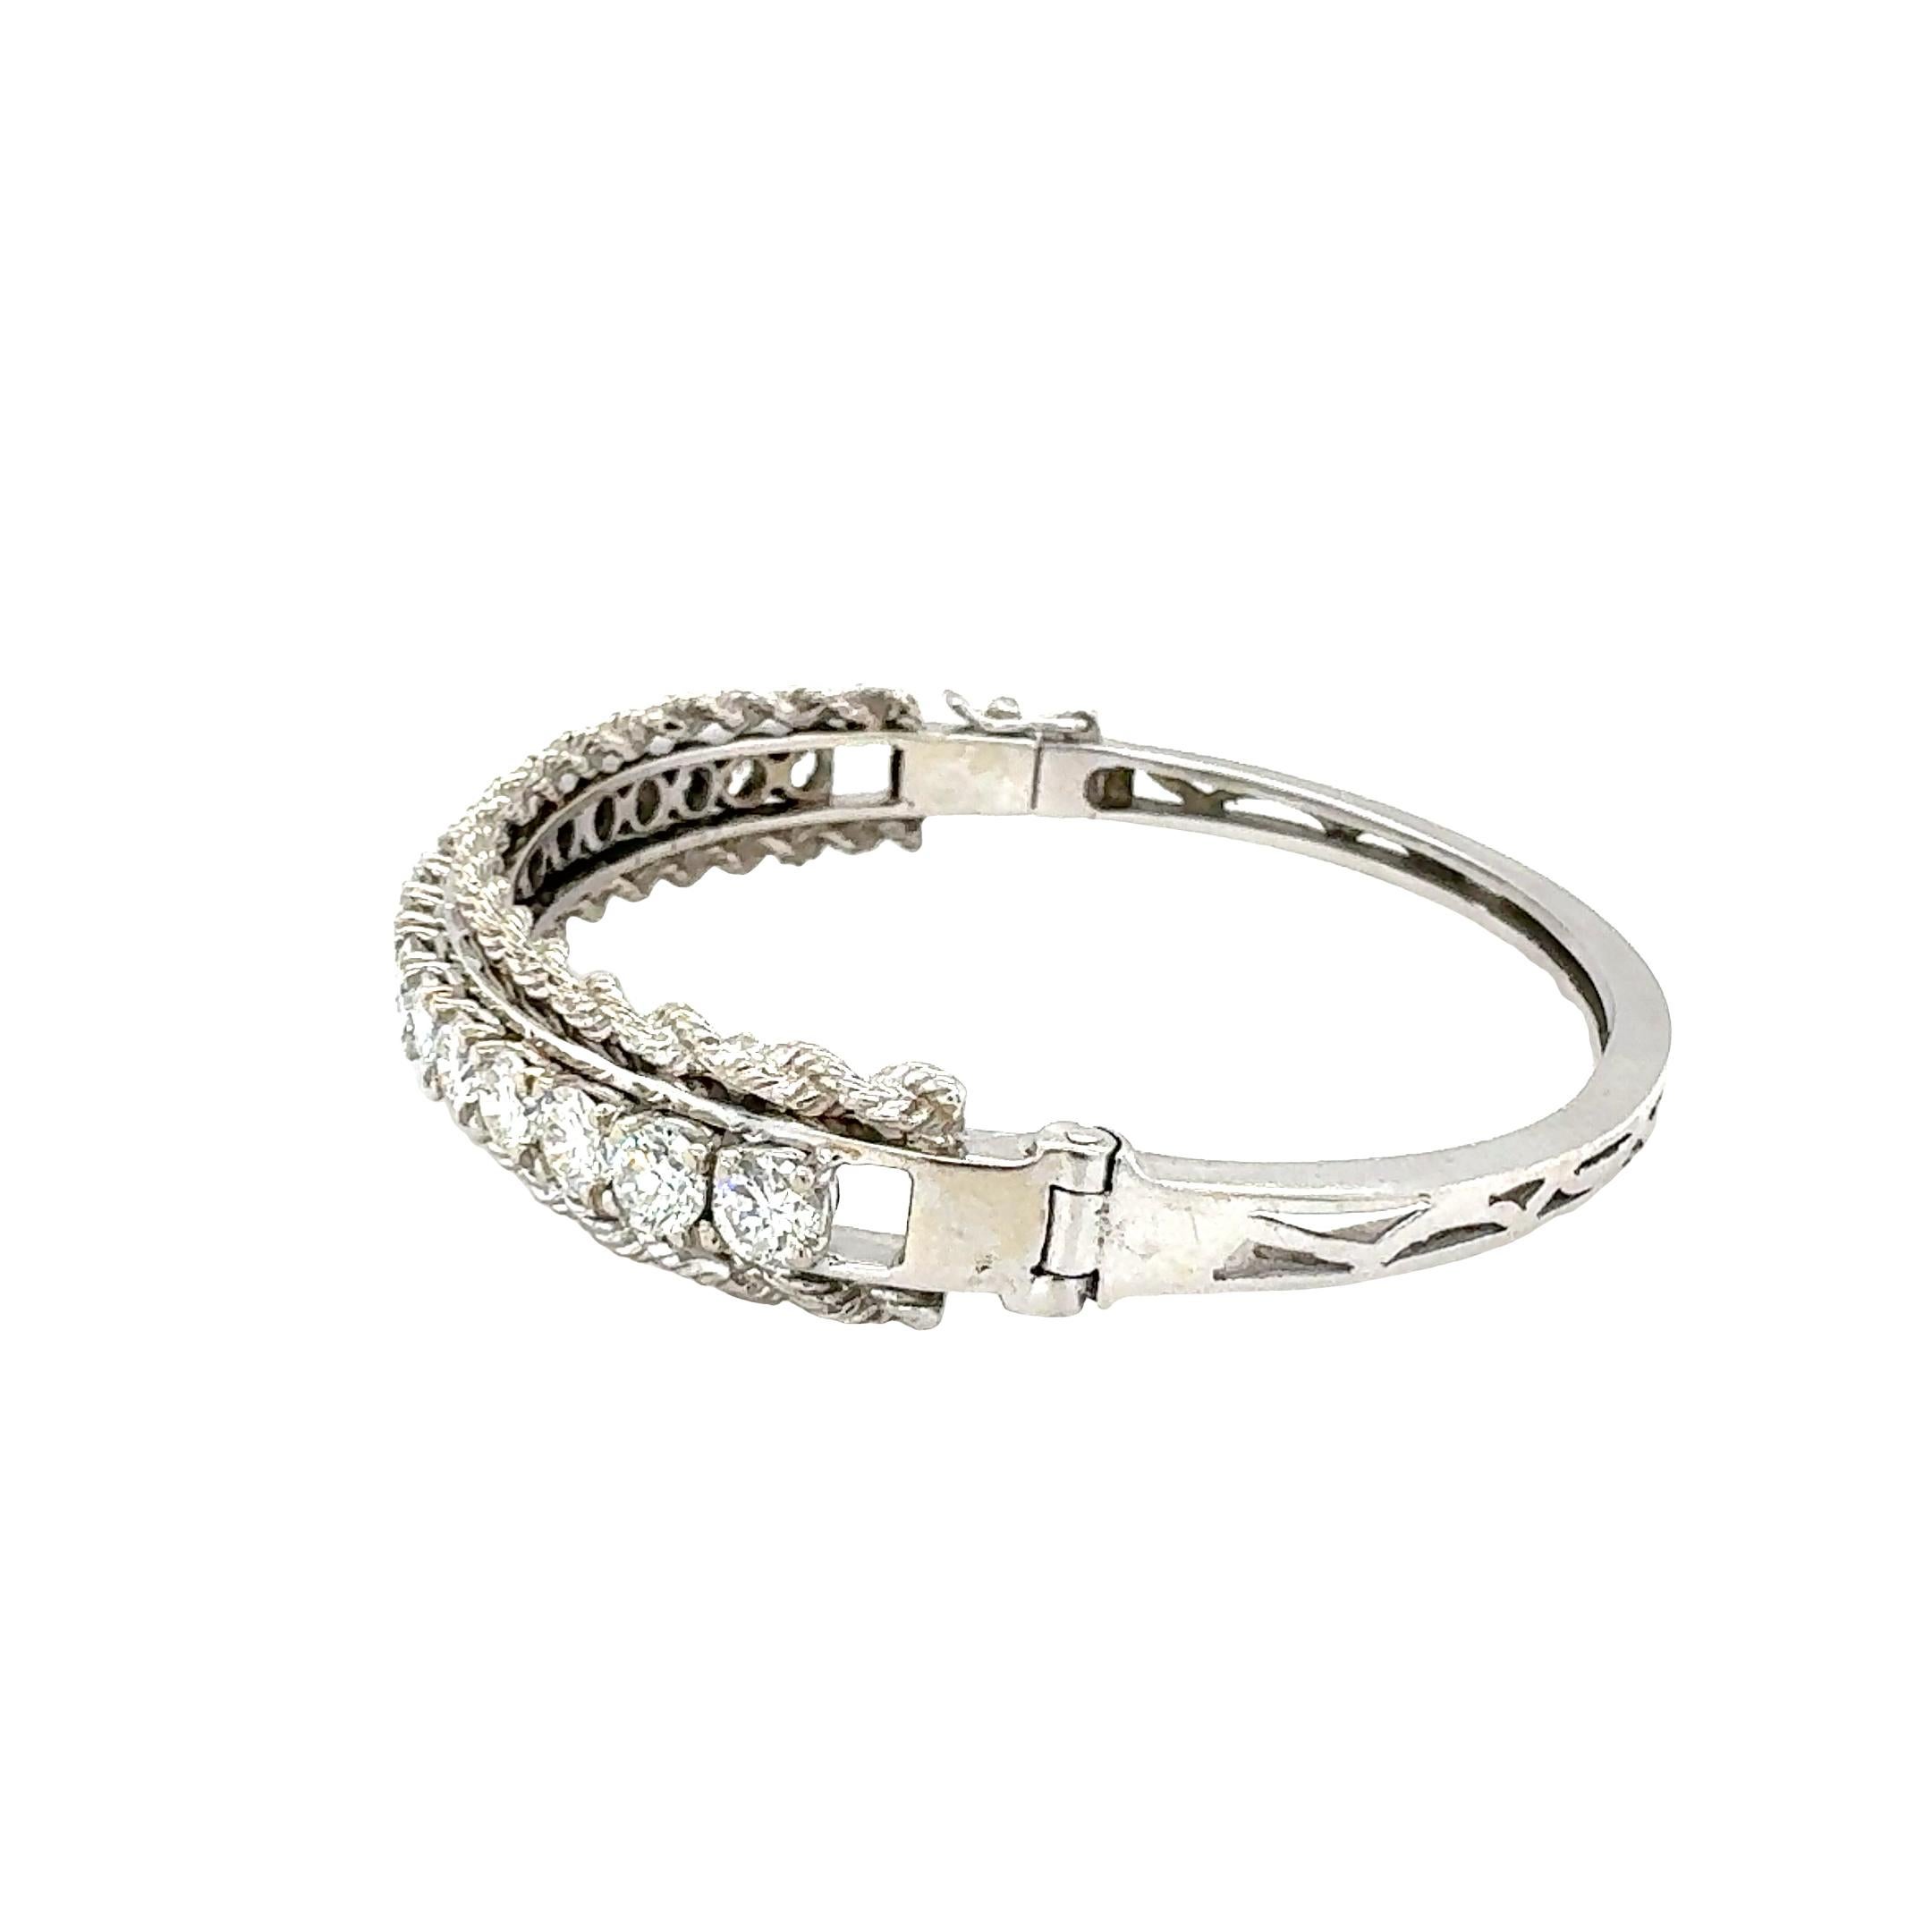 One diamond bangle bracelet in 14K white gold featuring 17 prong set, round brilliant cut diamonds with an approximate total weight of 4.54 ct. with G-H color and VS-2, SI-1 clarity. With twisted rope chain border, measuring 9.8 millimeters wide at